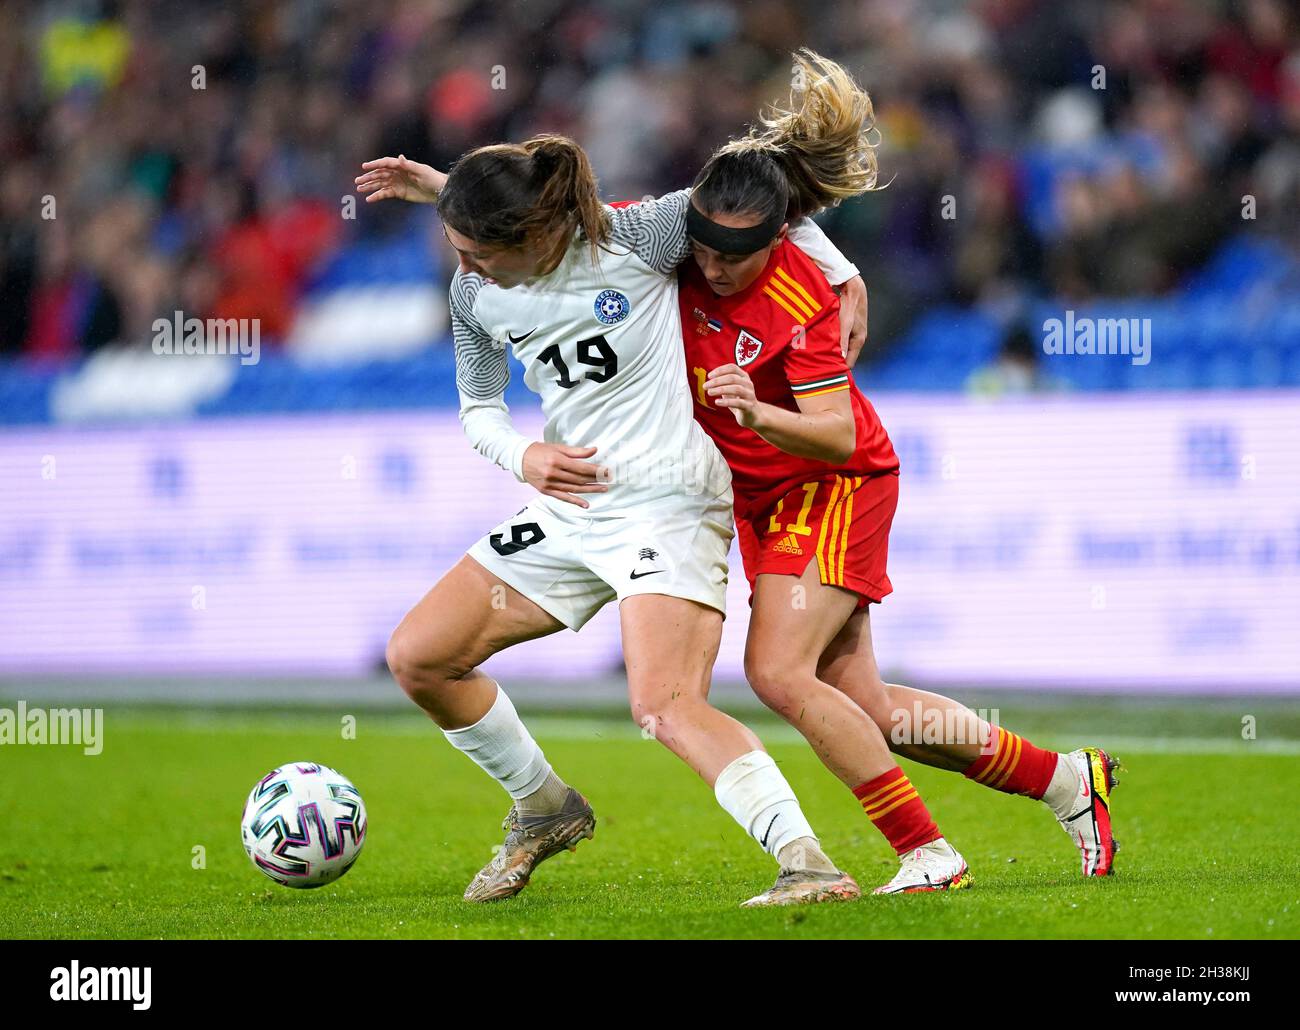 Estonia's Vlada Kubassova (left) and Wales' Natasha Harding battle for the ball during the FIFA Women's World Cup 2023 UEFA Qualifying match at the Cardiff City Stadium. Picture date: Tuesday October 26, 2021. Stock Photo